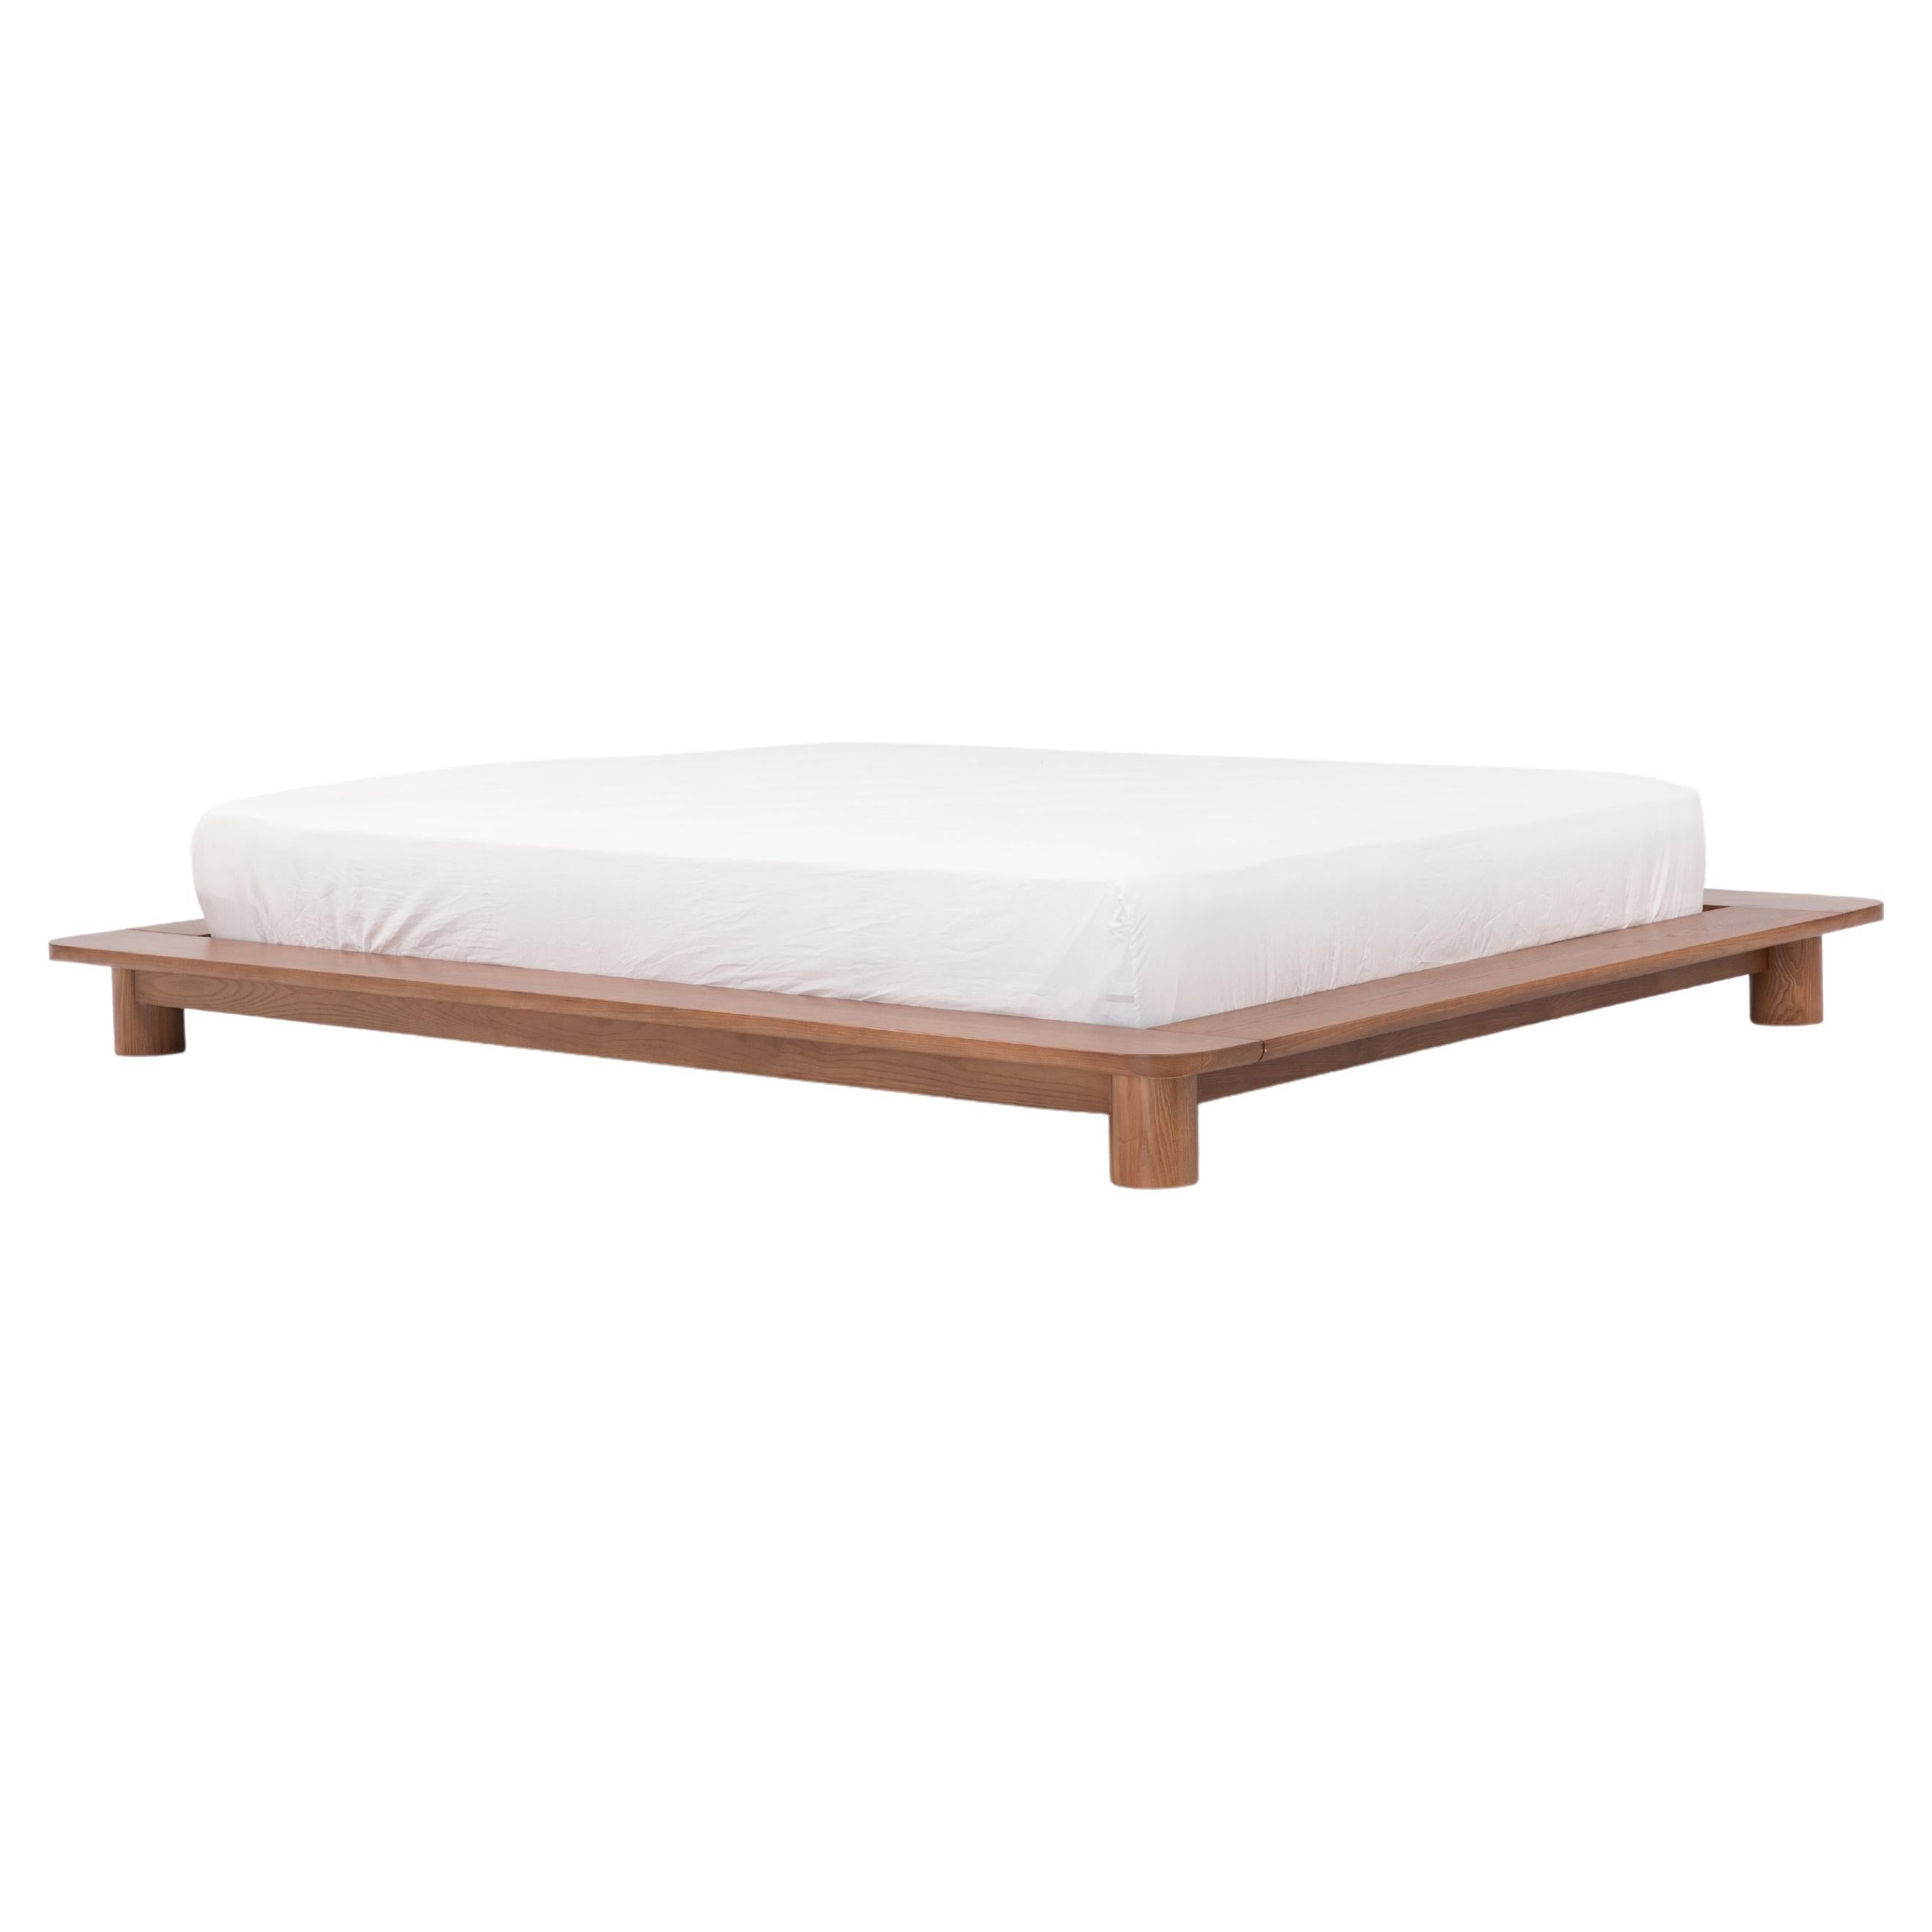 Kiral Platform Bed by Sun at Six, Minimalist Sienna Queen Bed in Wood